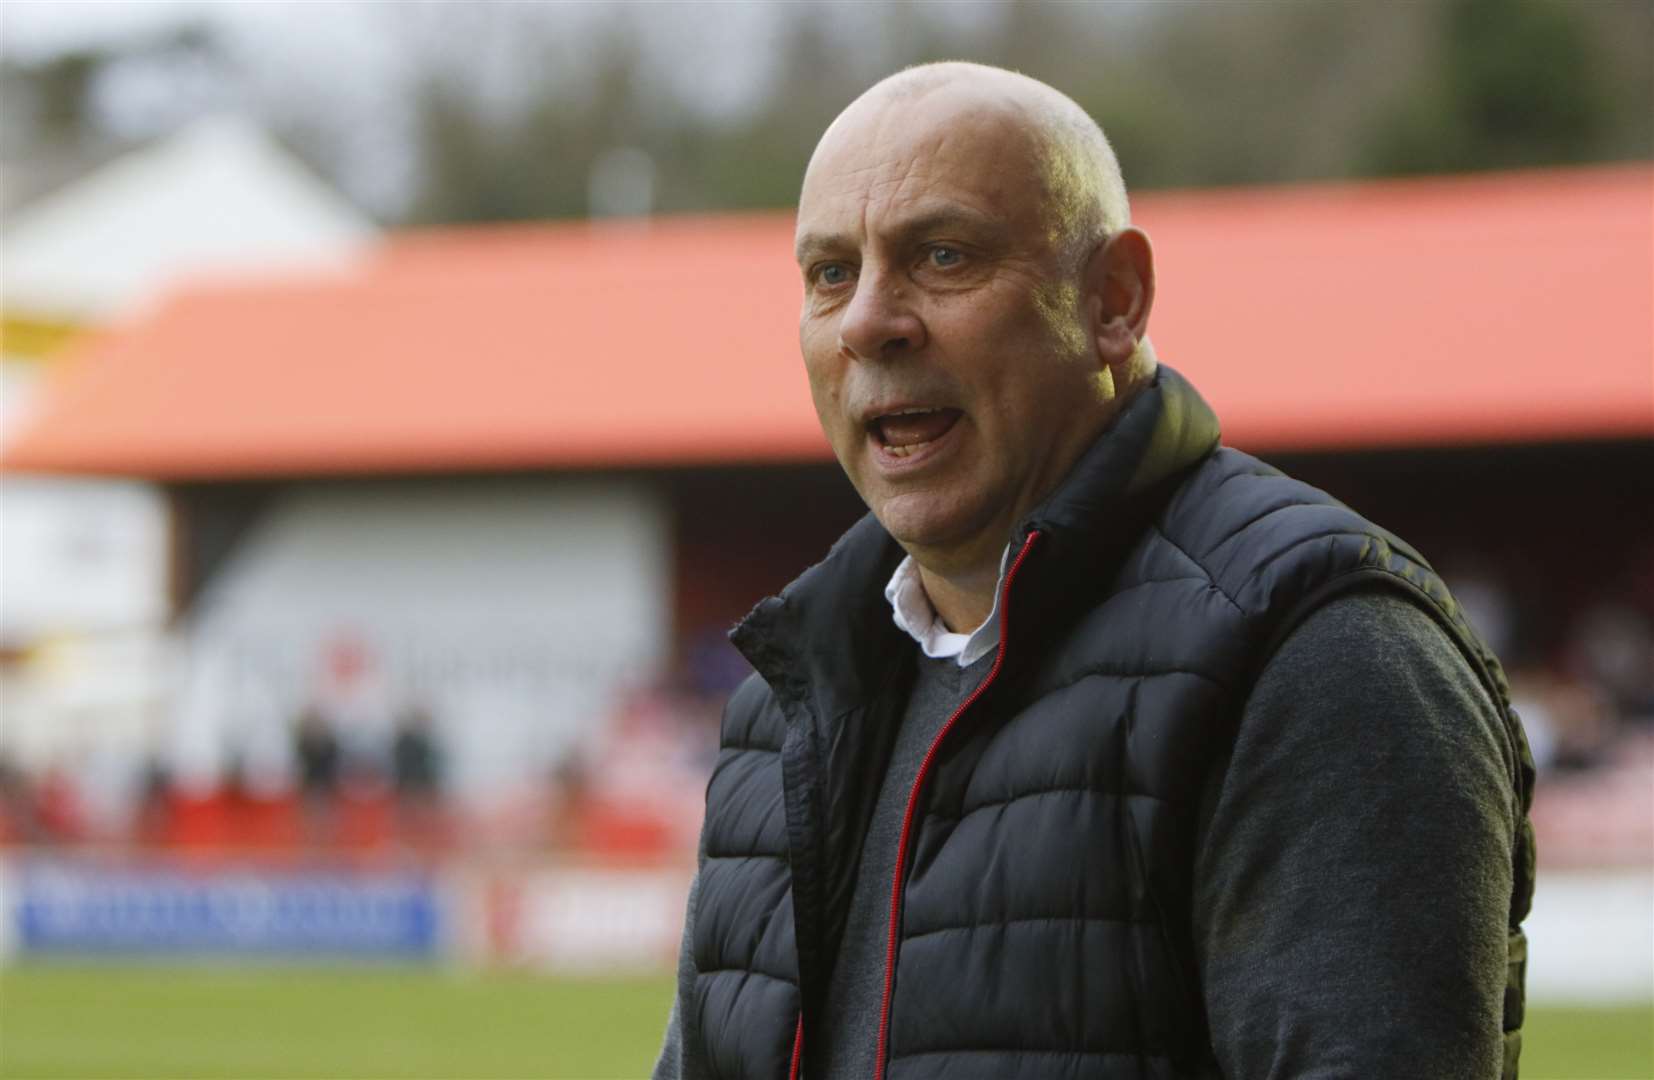 Garry Hill has worked alongside Dave Archer to restructure the club Picture: Andy Jones